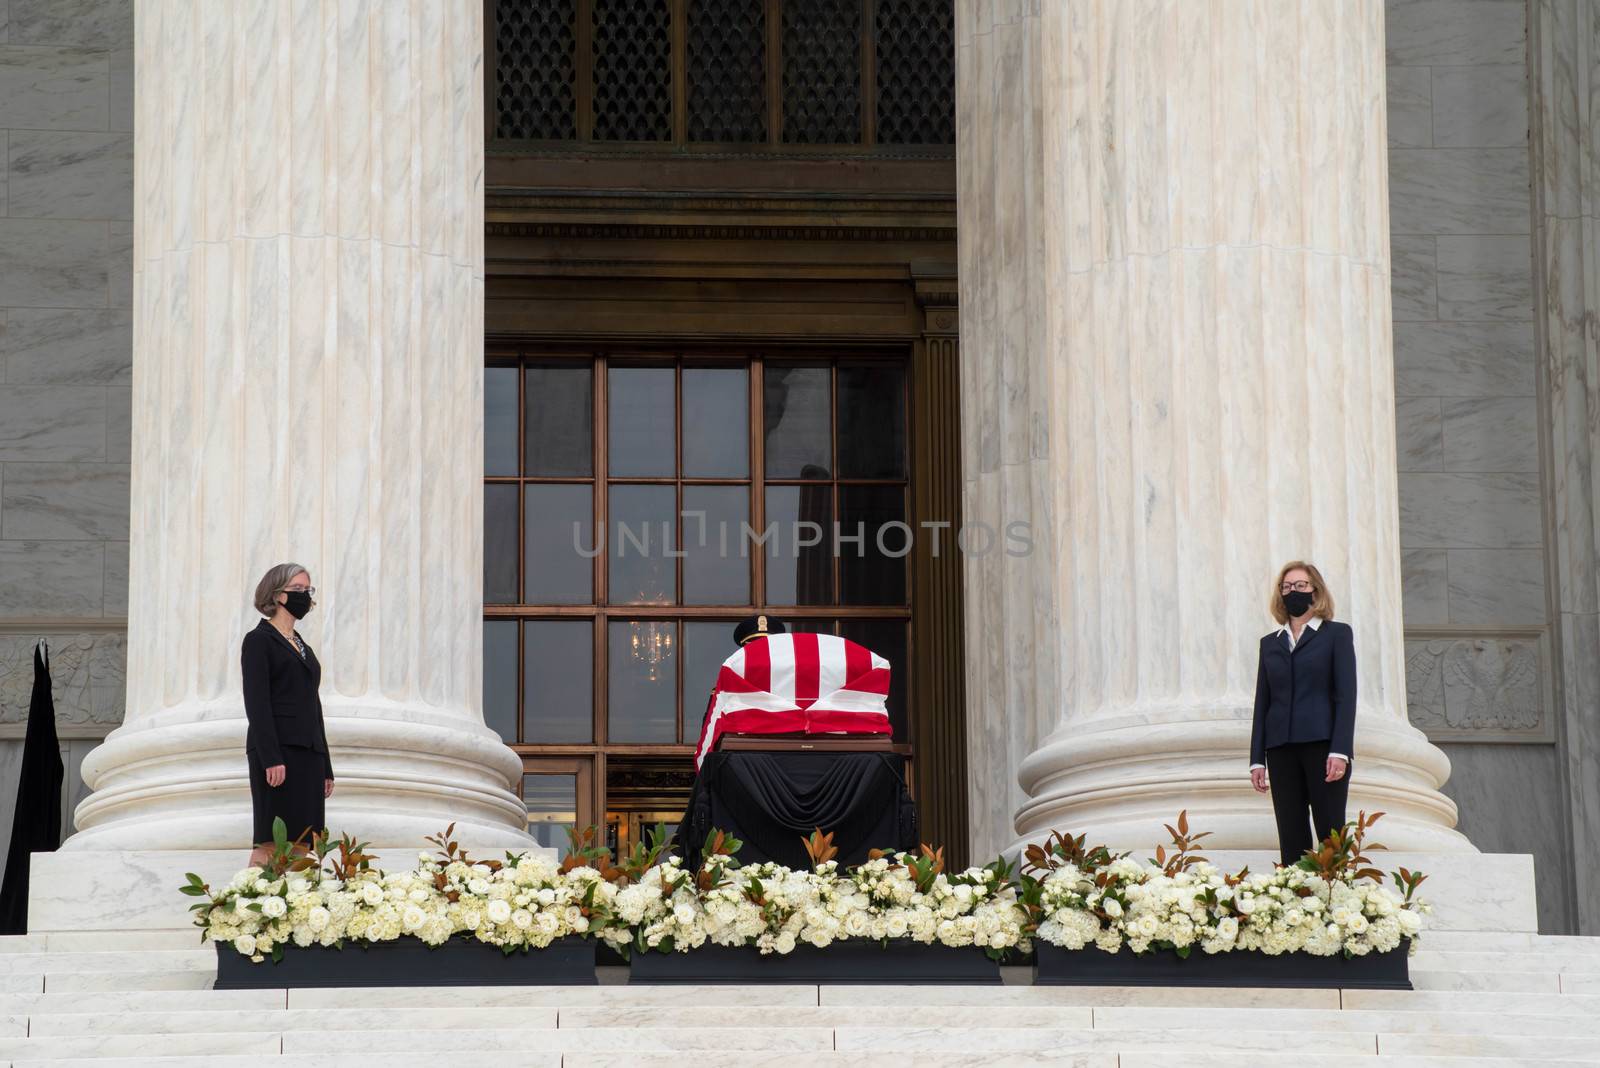 Washington, DC, USA / 9/24/2020: Justice Ruth Bader Ginsburg's casket draped in an American flag on the steps of the Supreme Court.